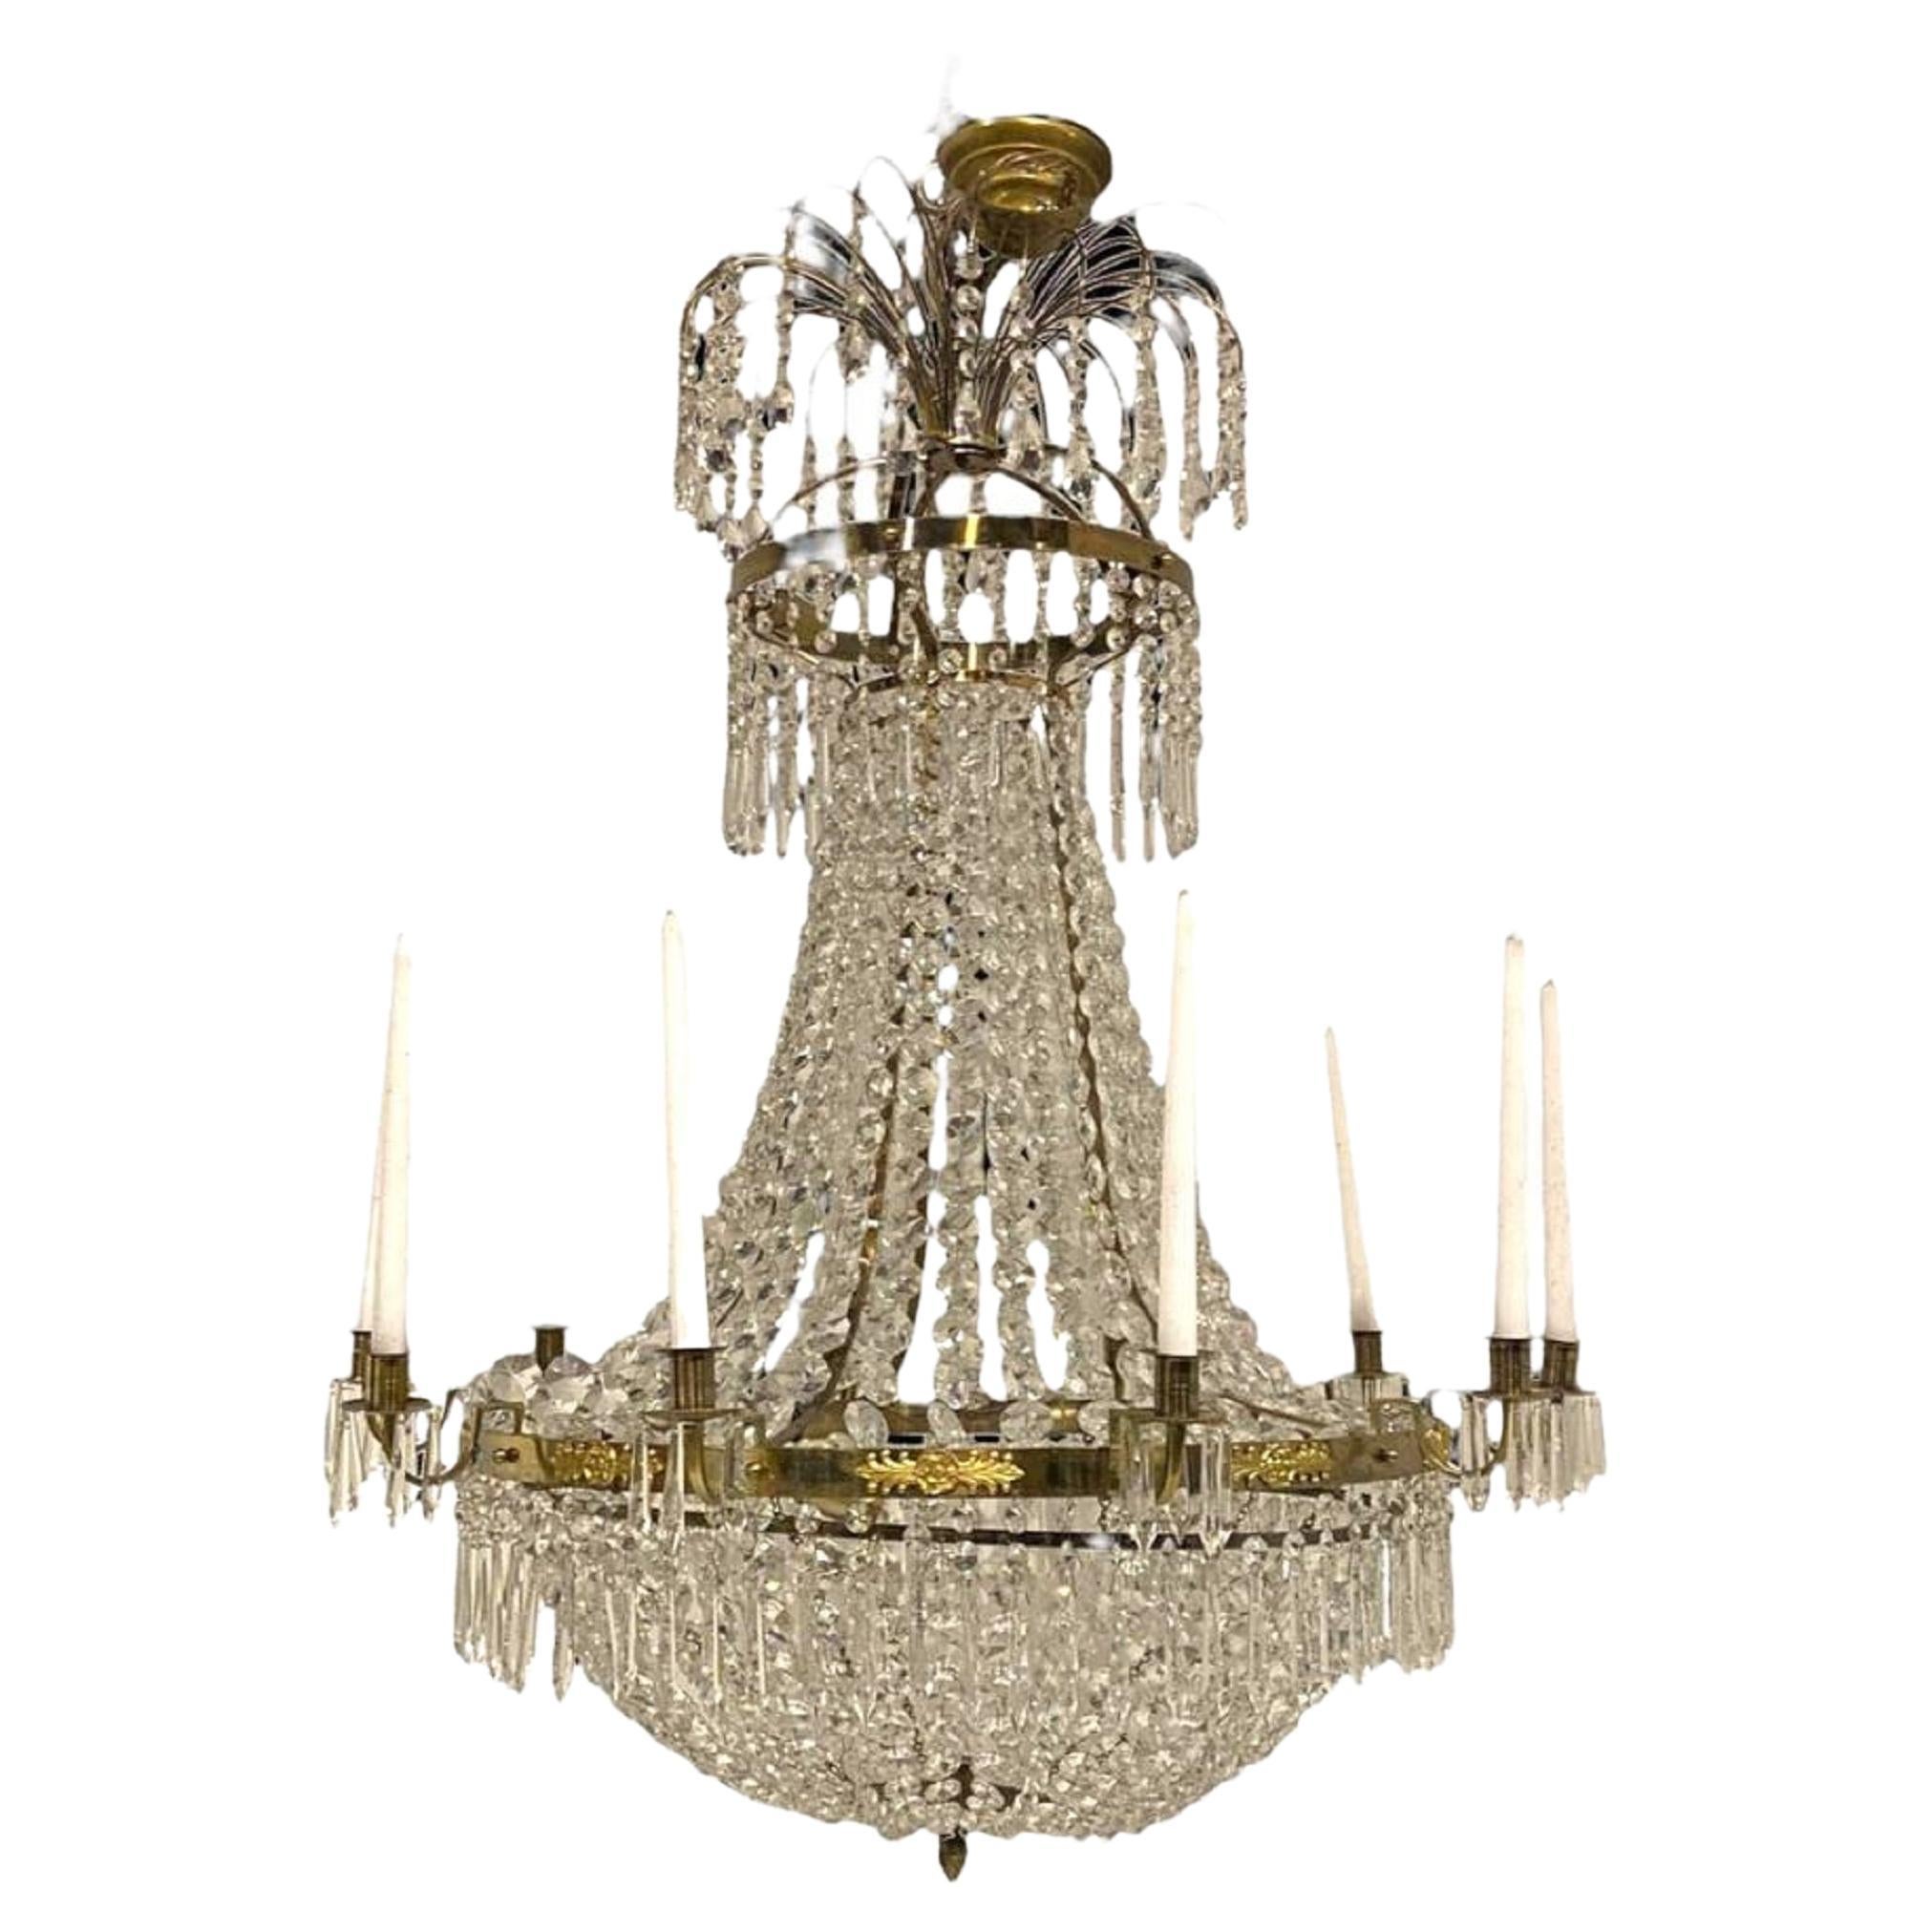 1900's Swedish Empire Crystal Chandelier with 12 lights For Sale